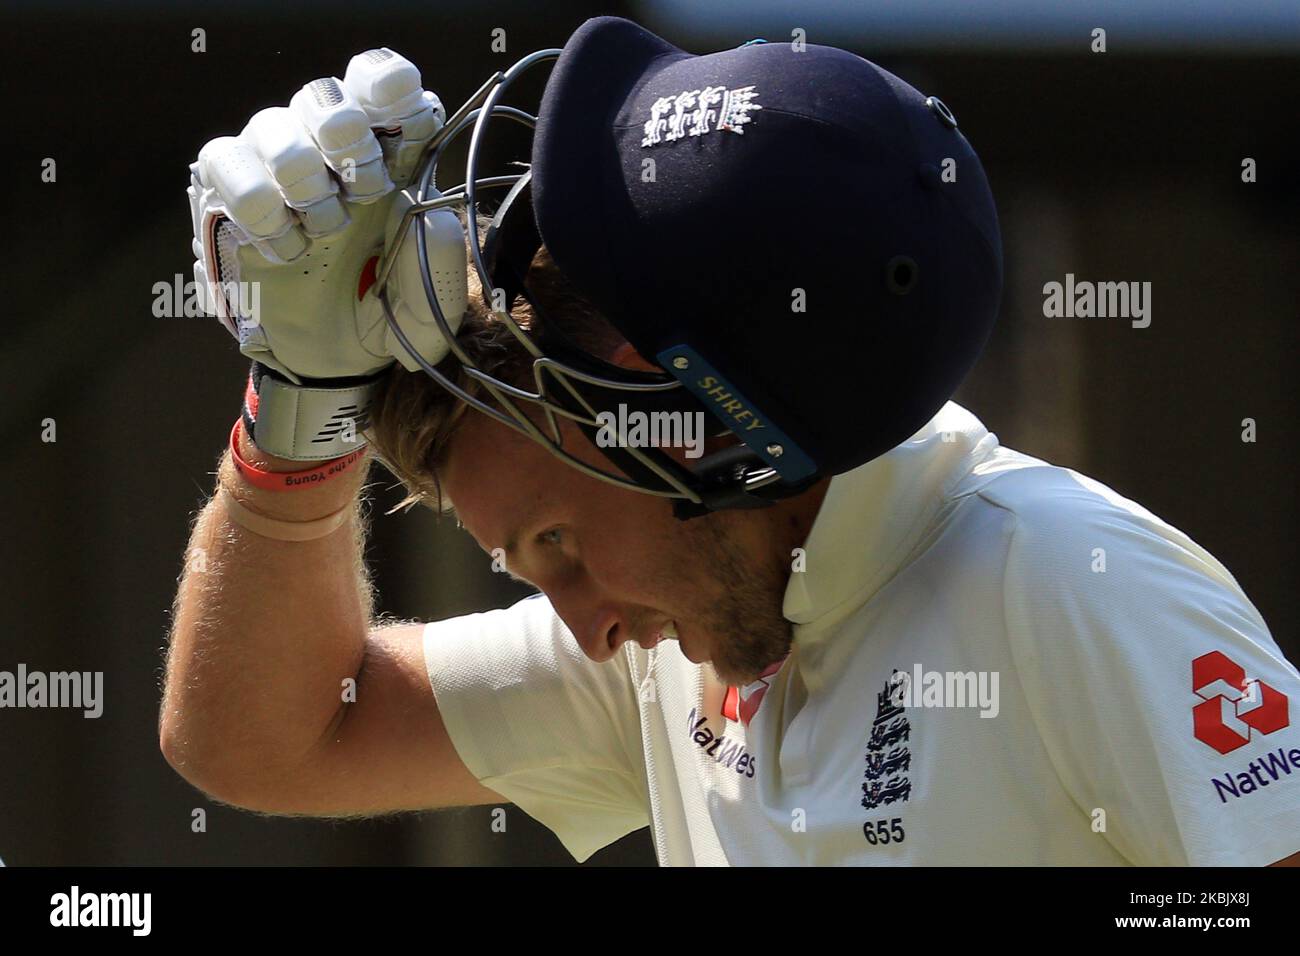 England cricket captain Joe Root removes the helmet as he leaves the field at the tea break during the first day of the 2nd Warm up cricket match between Sri Lanka's Board President's XI and England at P Sara Oval on March 12, 2020 in Colombo, Sri Lanka. (Photo by Tharaka Basnayaka/NurPhoto) Stock Photo